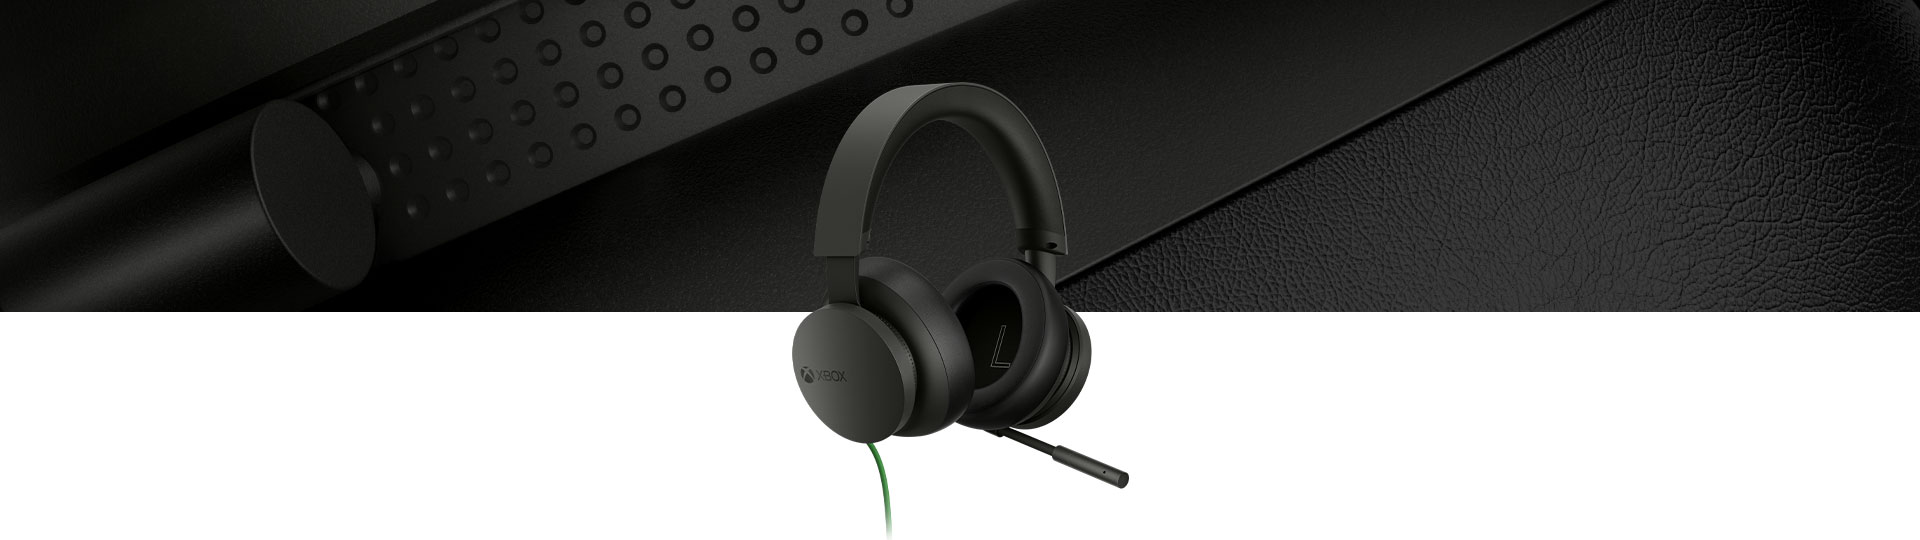 Xbox Stereo headset with a close up of the headset in the background